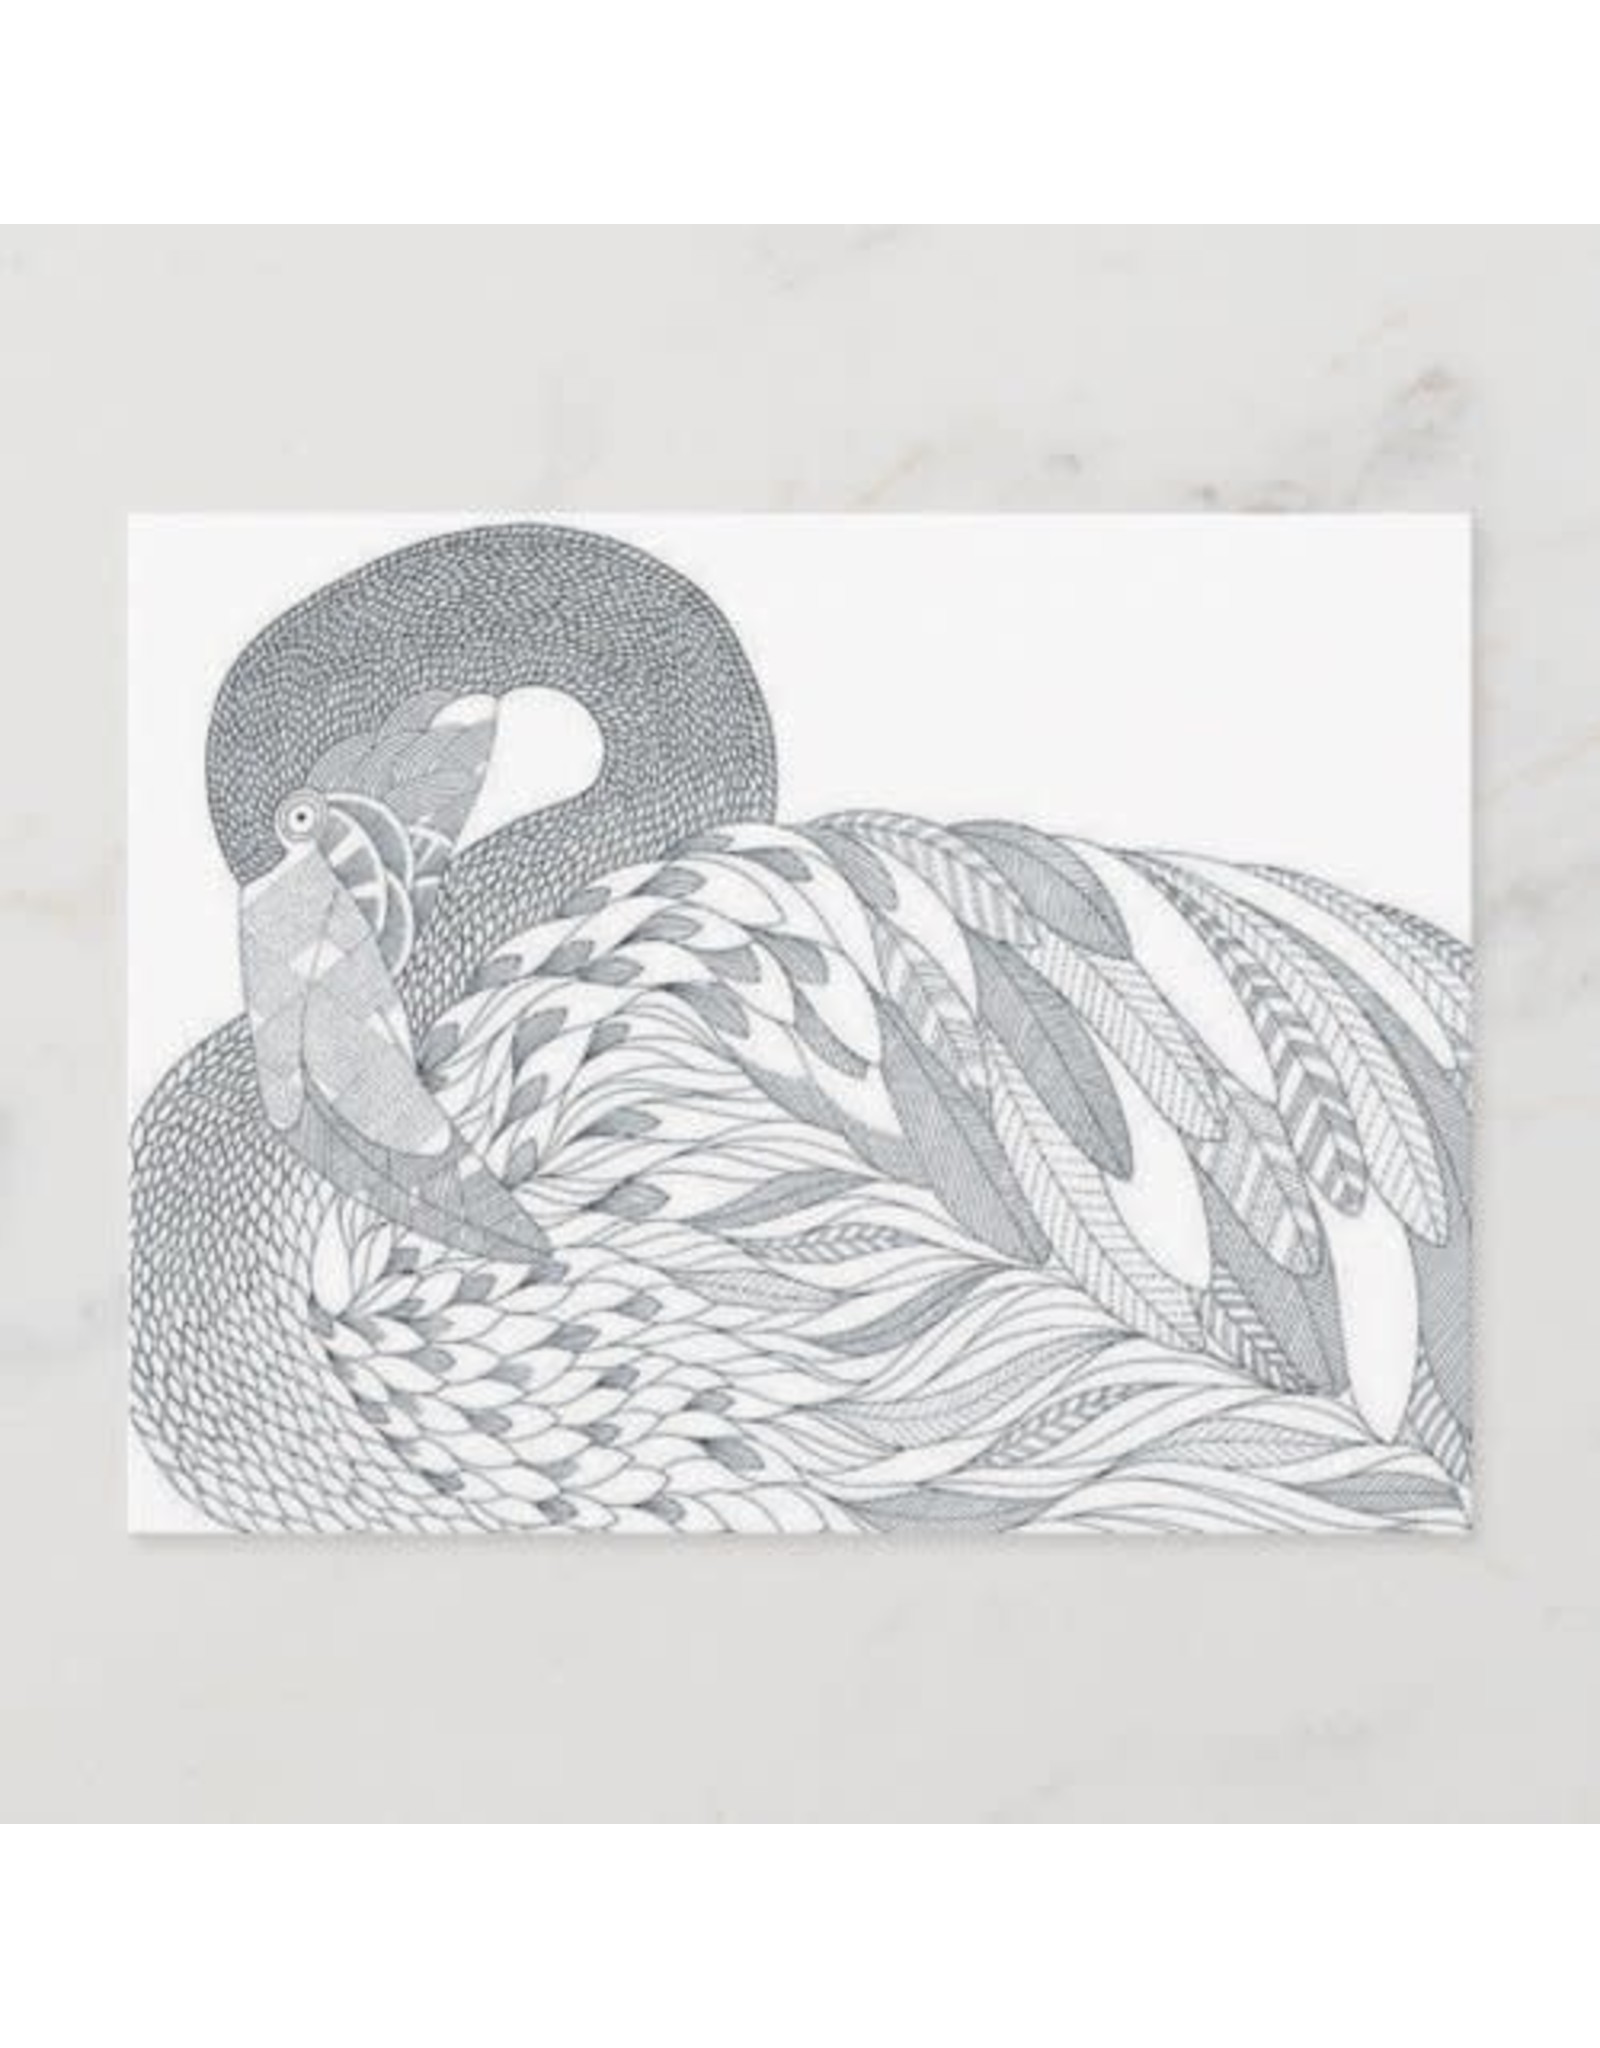 Two Sided Swan Adult Coloring Postcard